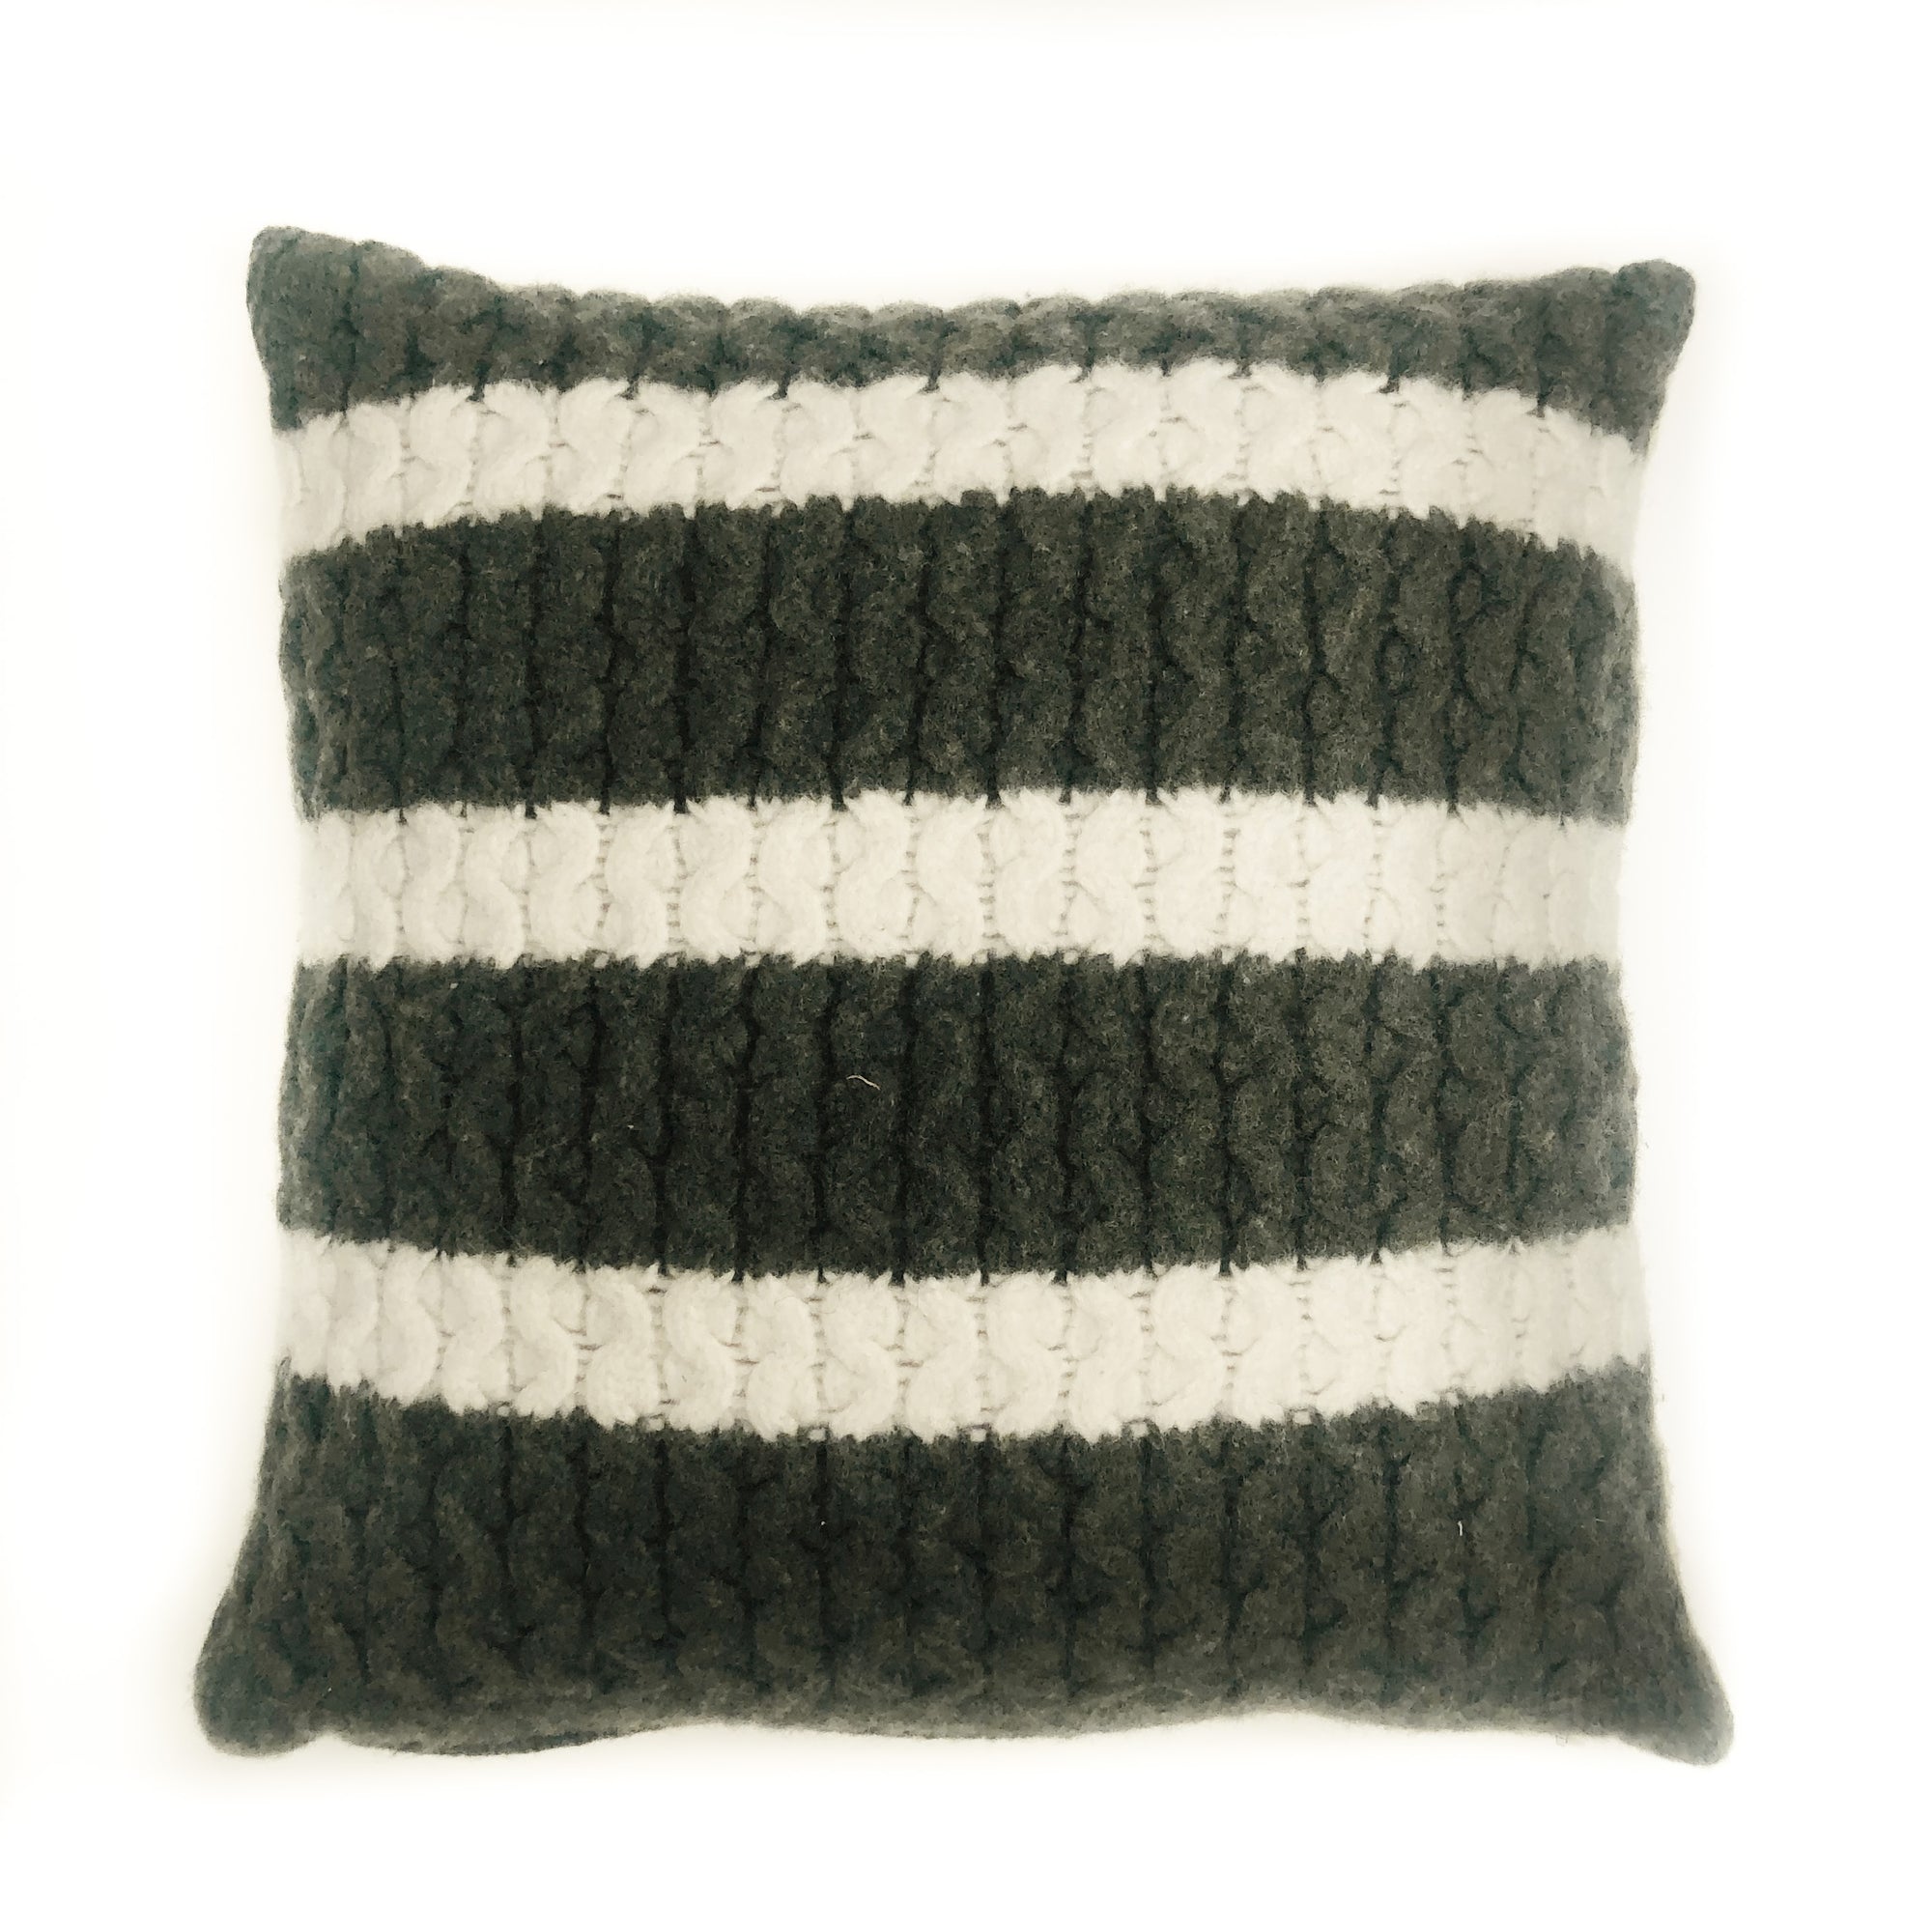 13 x 13 Wool Striped Pillow Cover